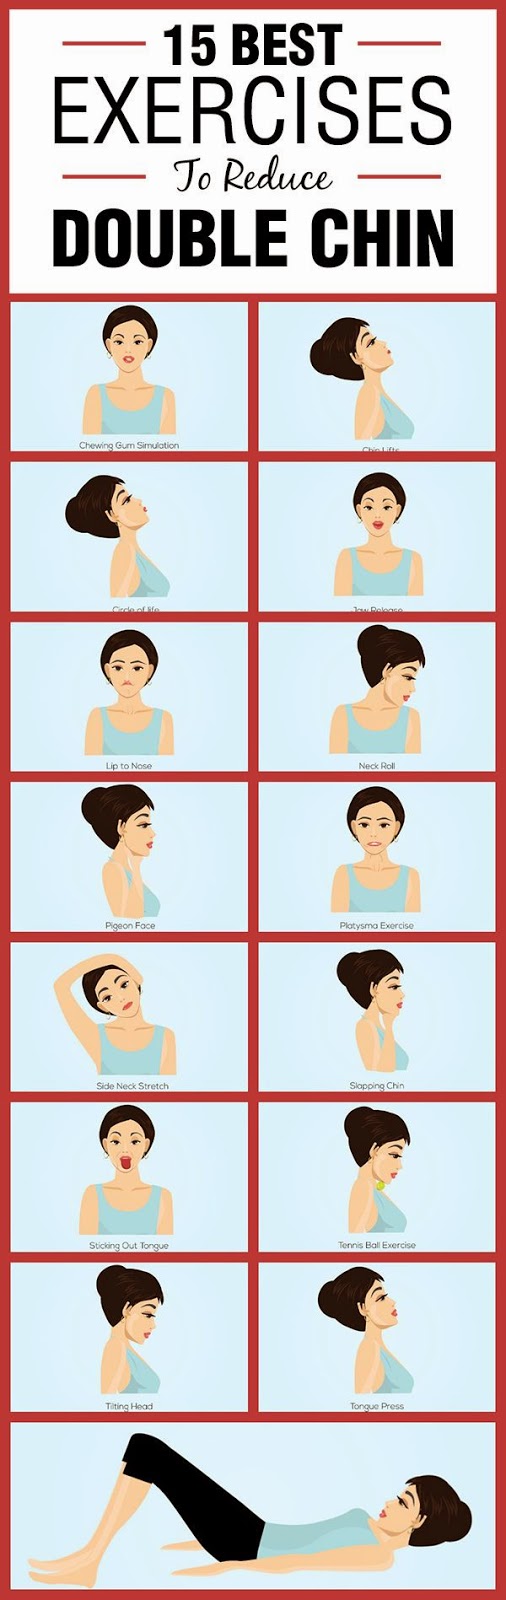 How To Get Rid Of A Double Chin 15 Best Exercises To Reduce A Double Chin